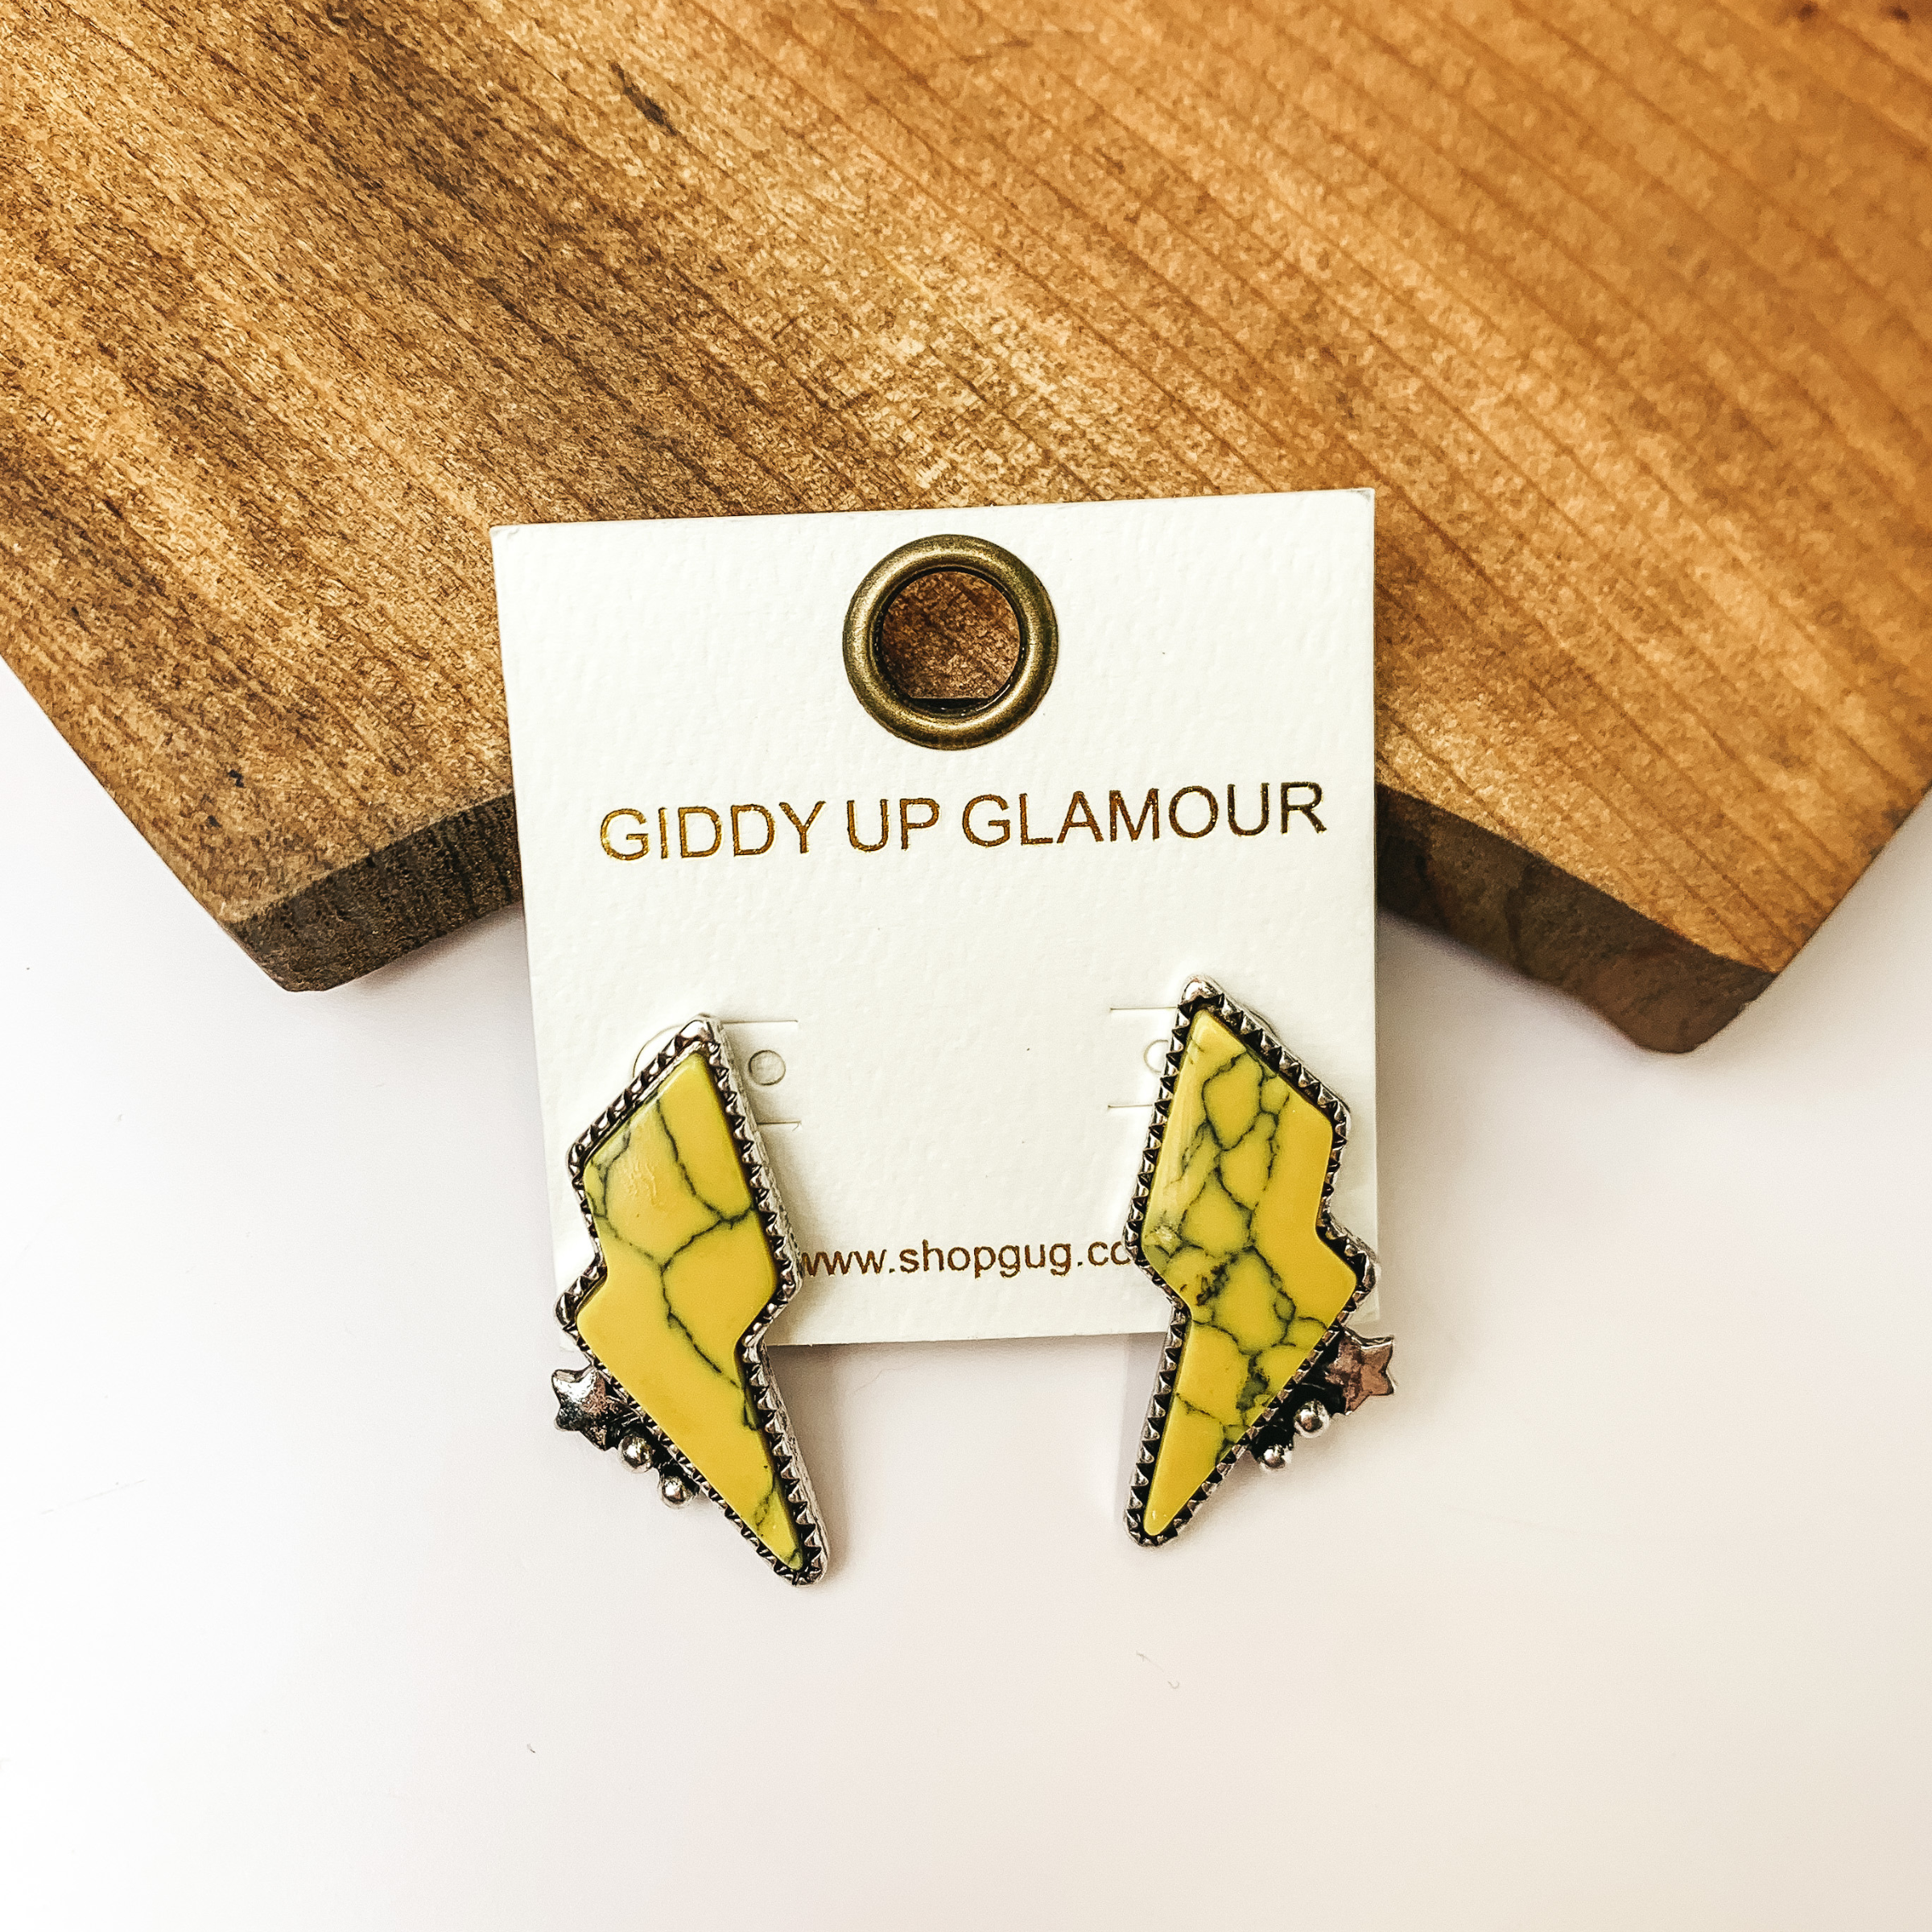 Driving Down Lightning Bolt Stone Post Earrings in Yellow with Silver Detailing. Pictured on a white background with the earrings sitting against a piece of wood.